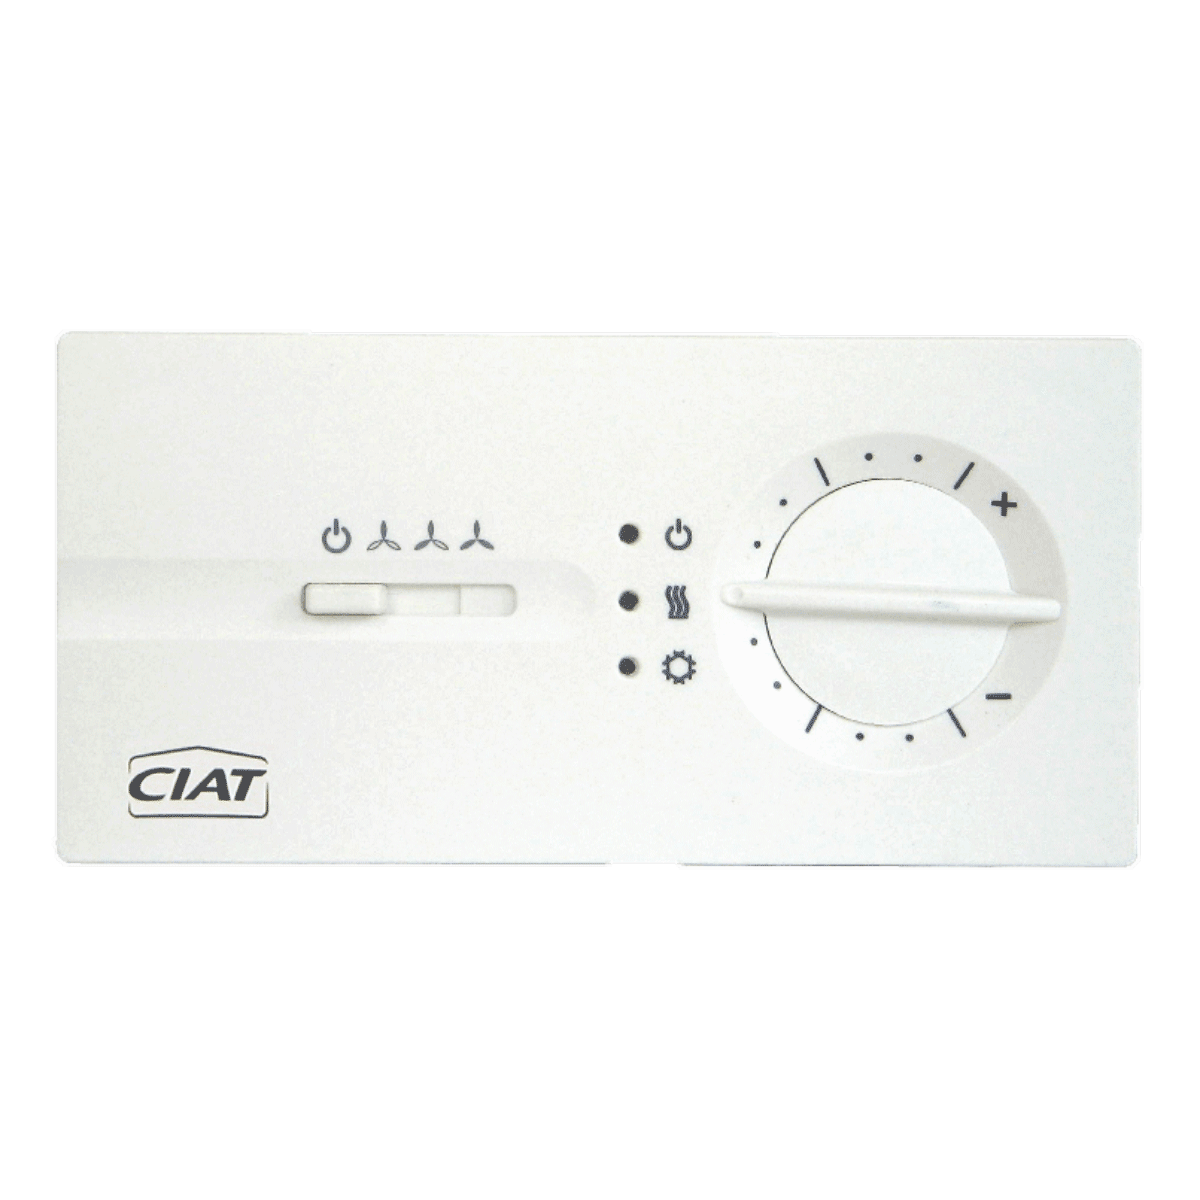 ciat-v30-fan-coil-units-control-wall-mounted-2